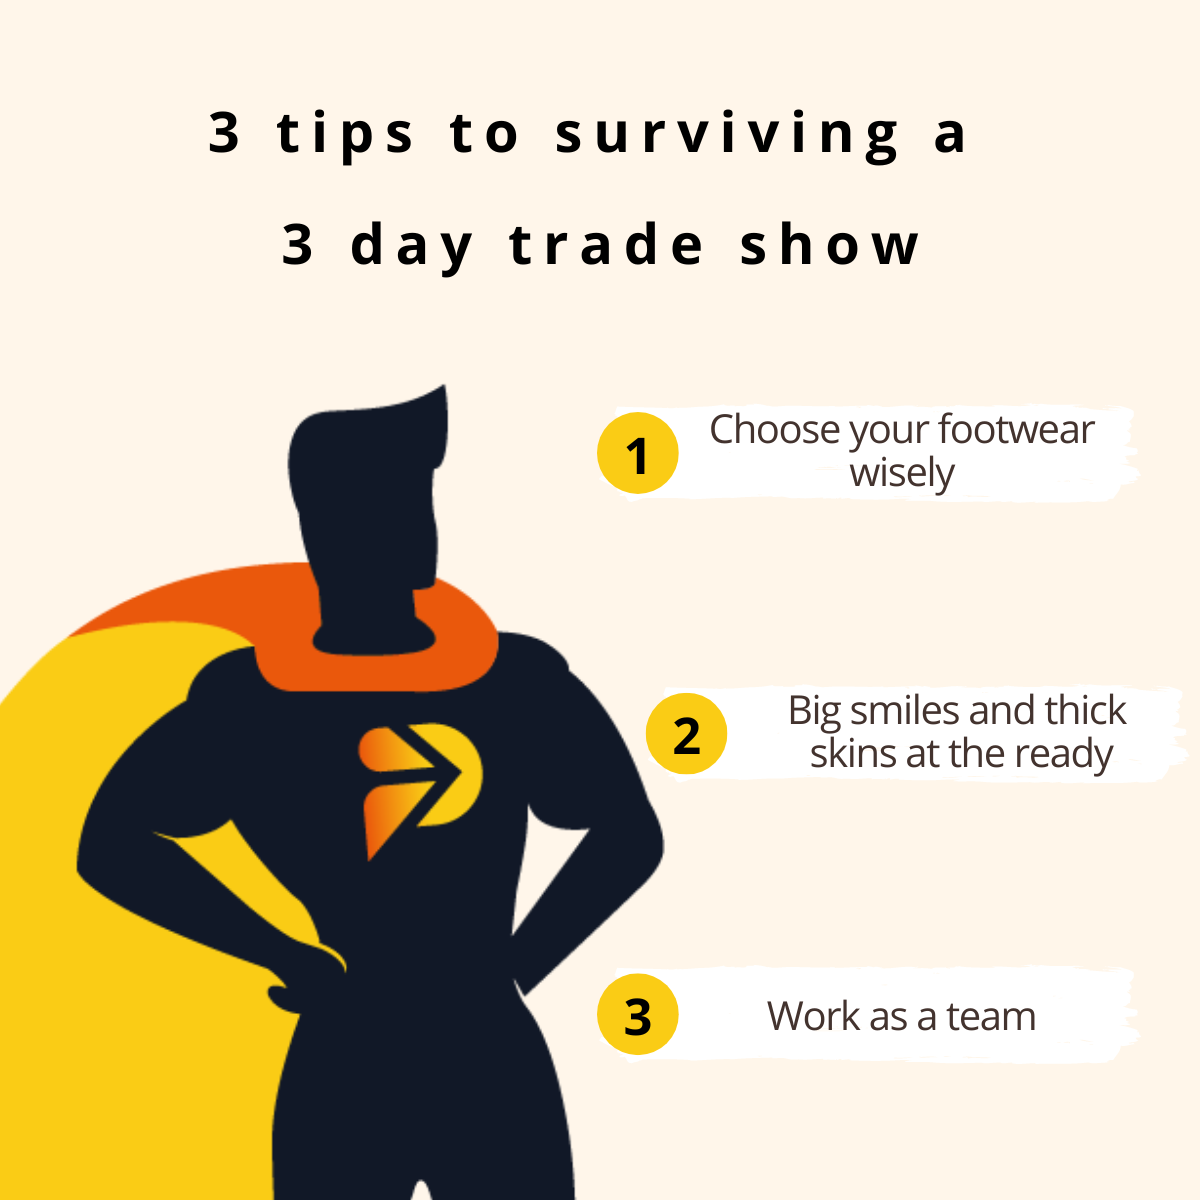 Tips for surviving a 3 day trade show